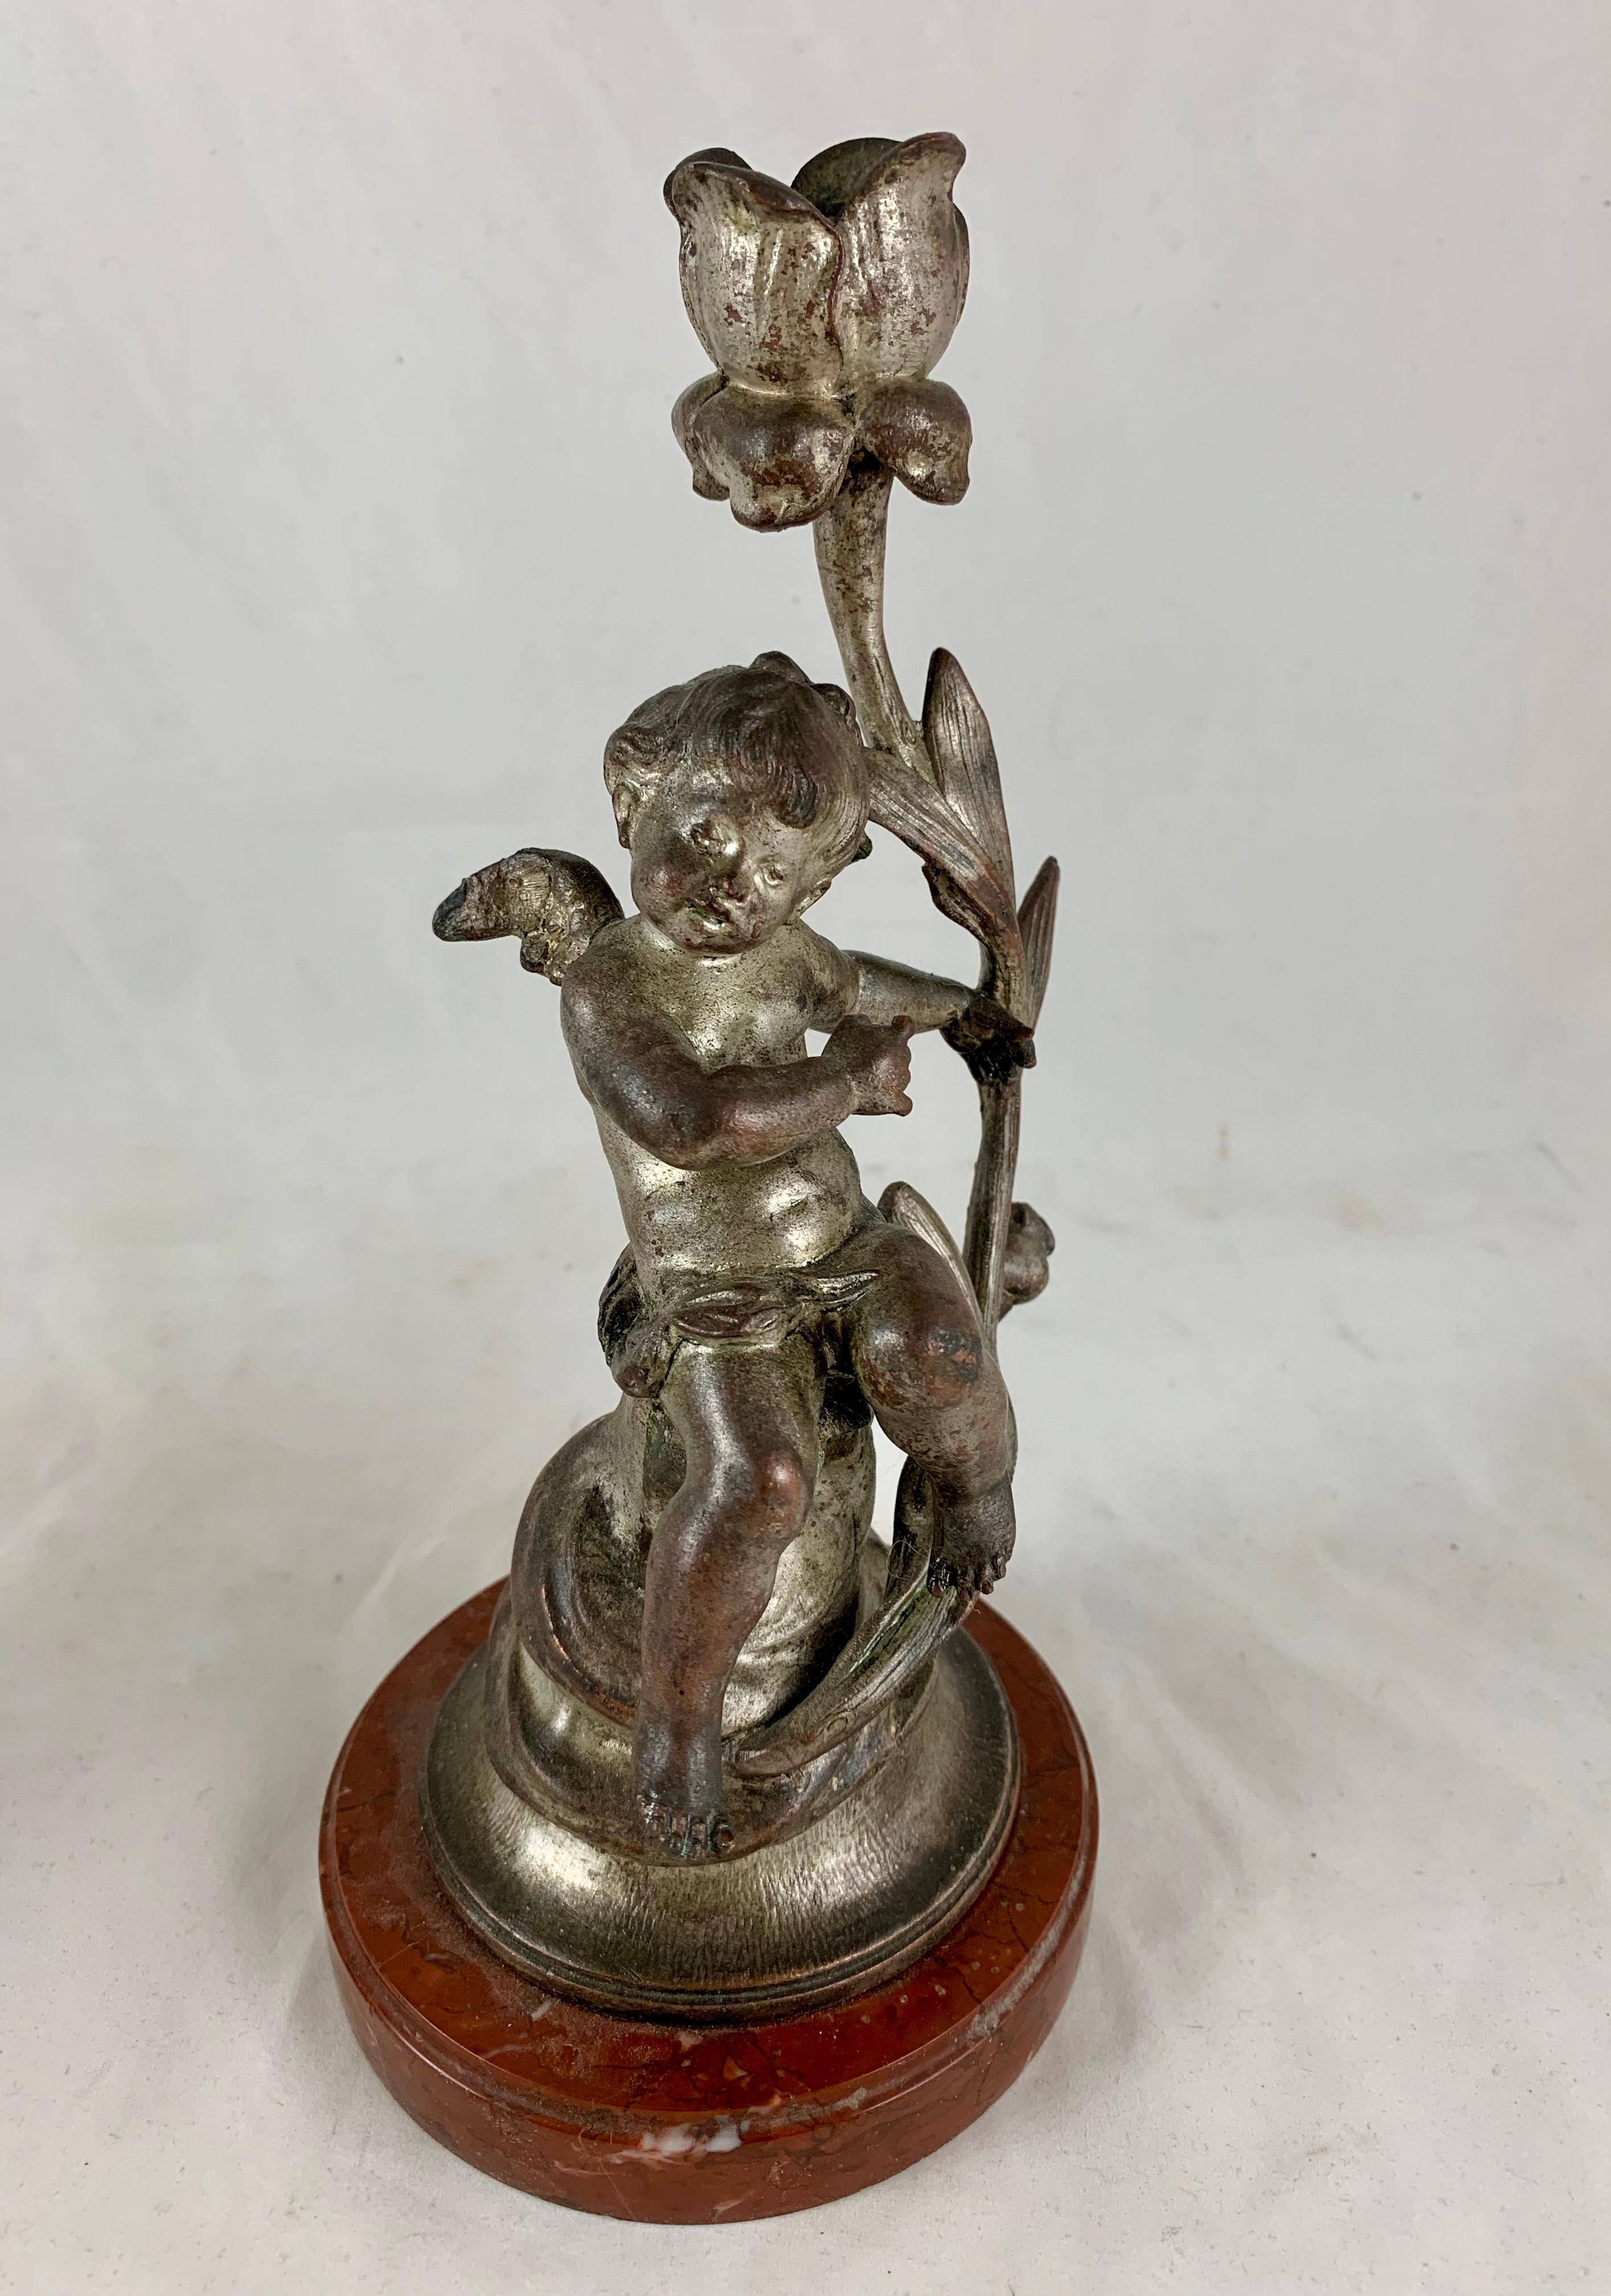 French Putti Cherub Candlesticks Signed Sylvain Kinsburger Spelter & Marble S/2 6